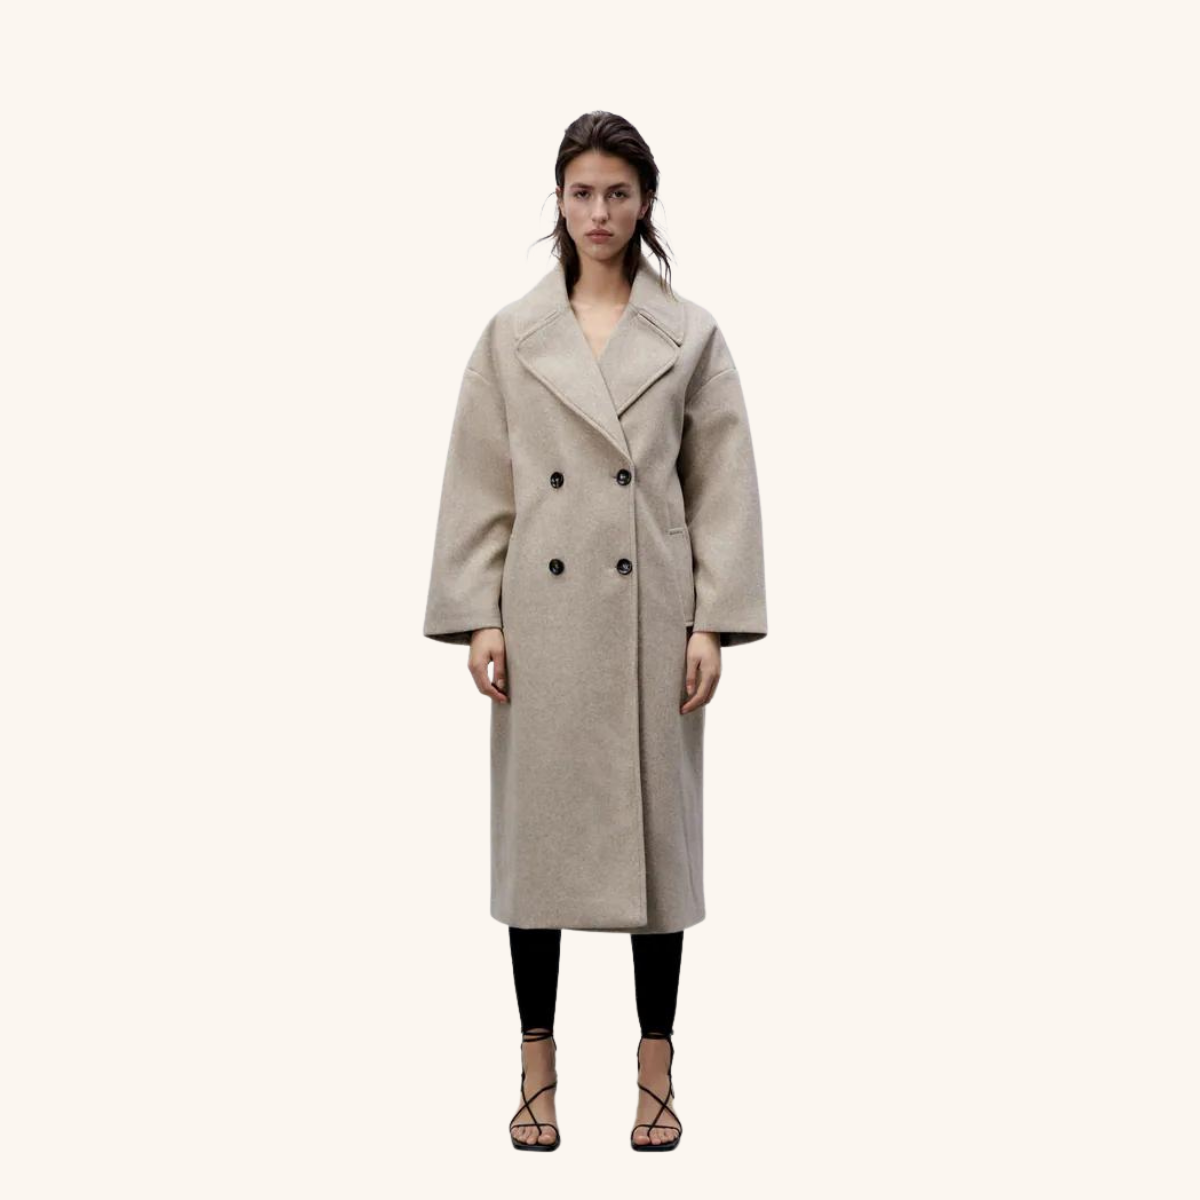   Sandro Mystere Double-Breasted Wool Coat, $447  